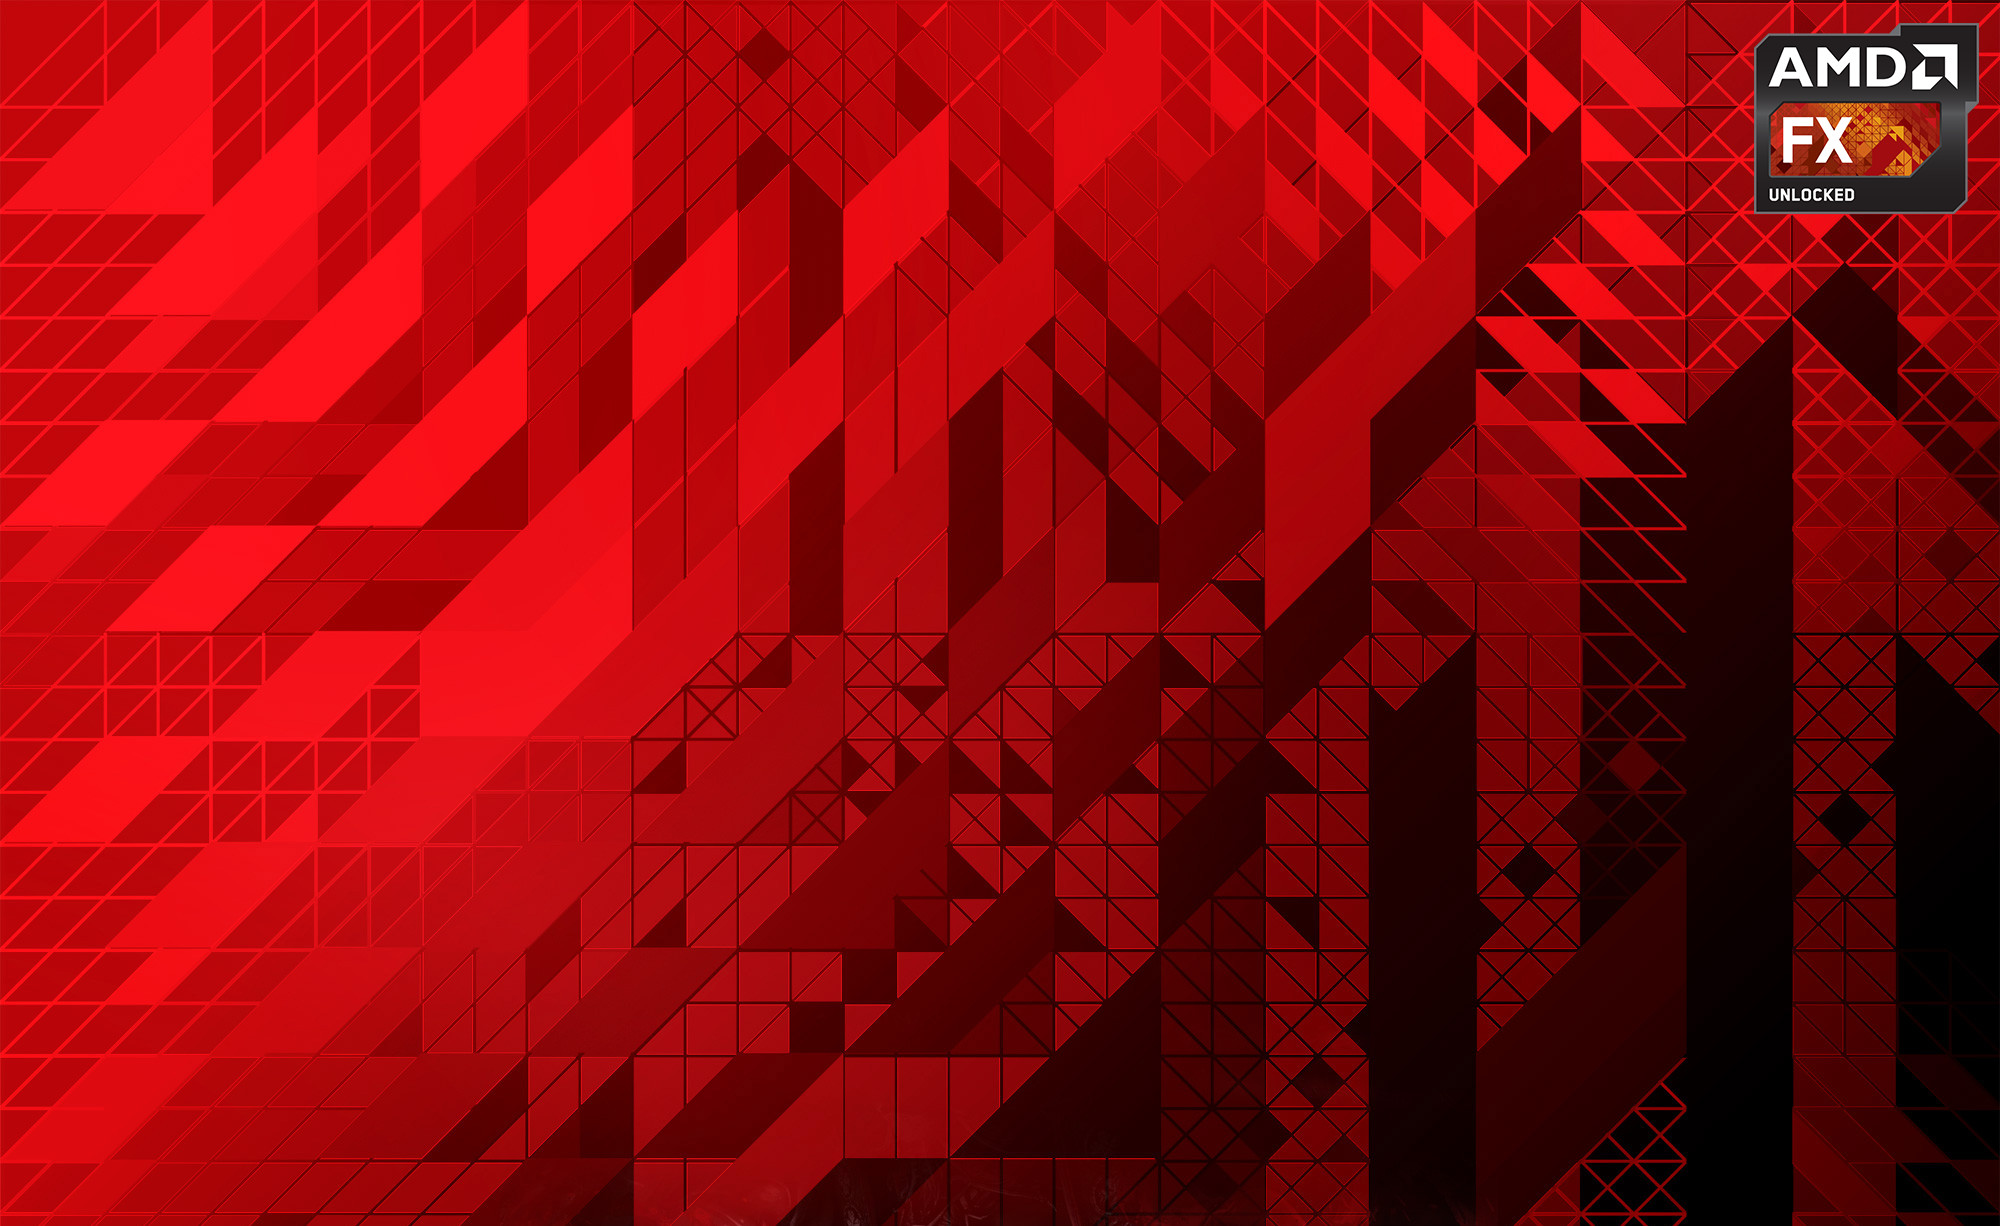 2000x1226 I've created this glorious wallpaper set for those of us who praise Lord  GabeN with AMD! : pcmasterrace